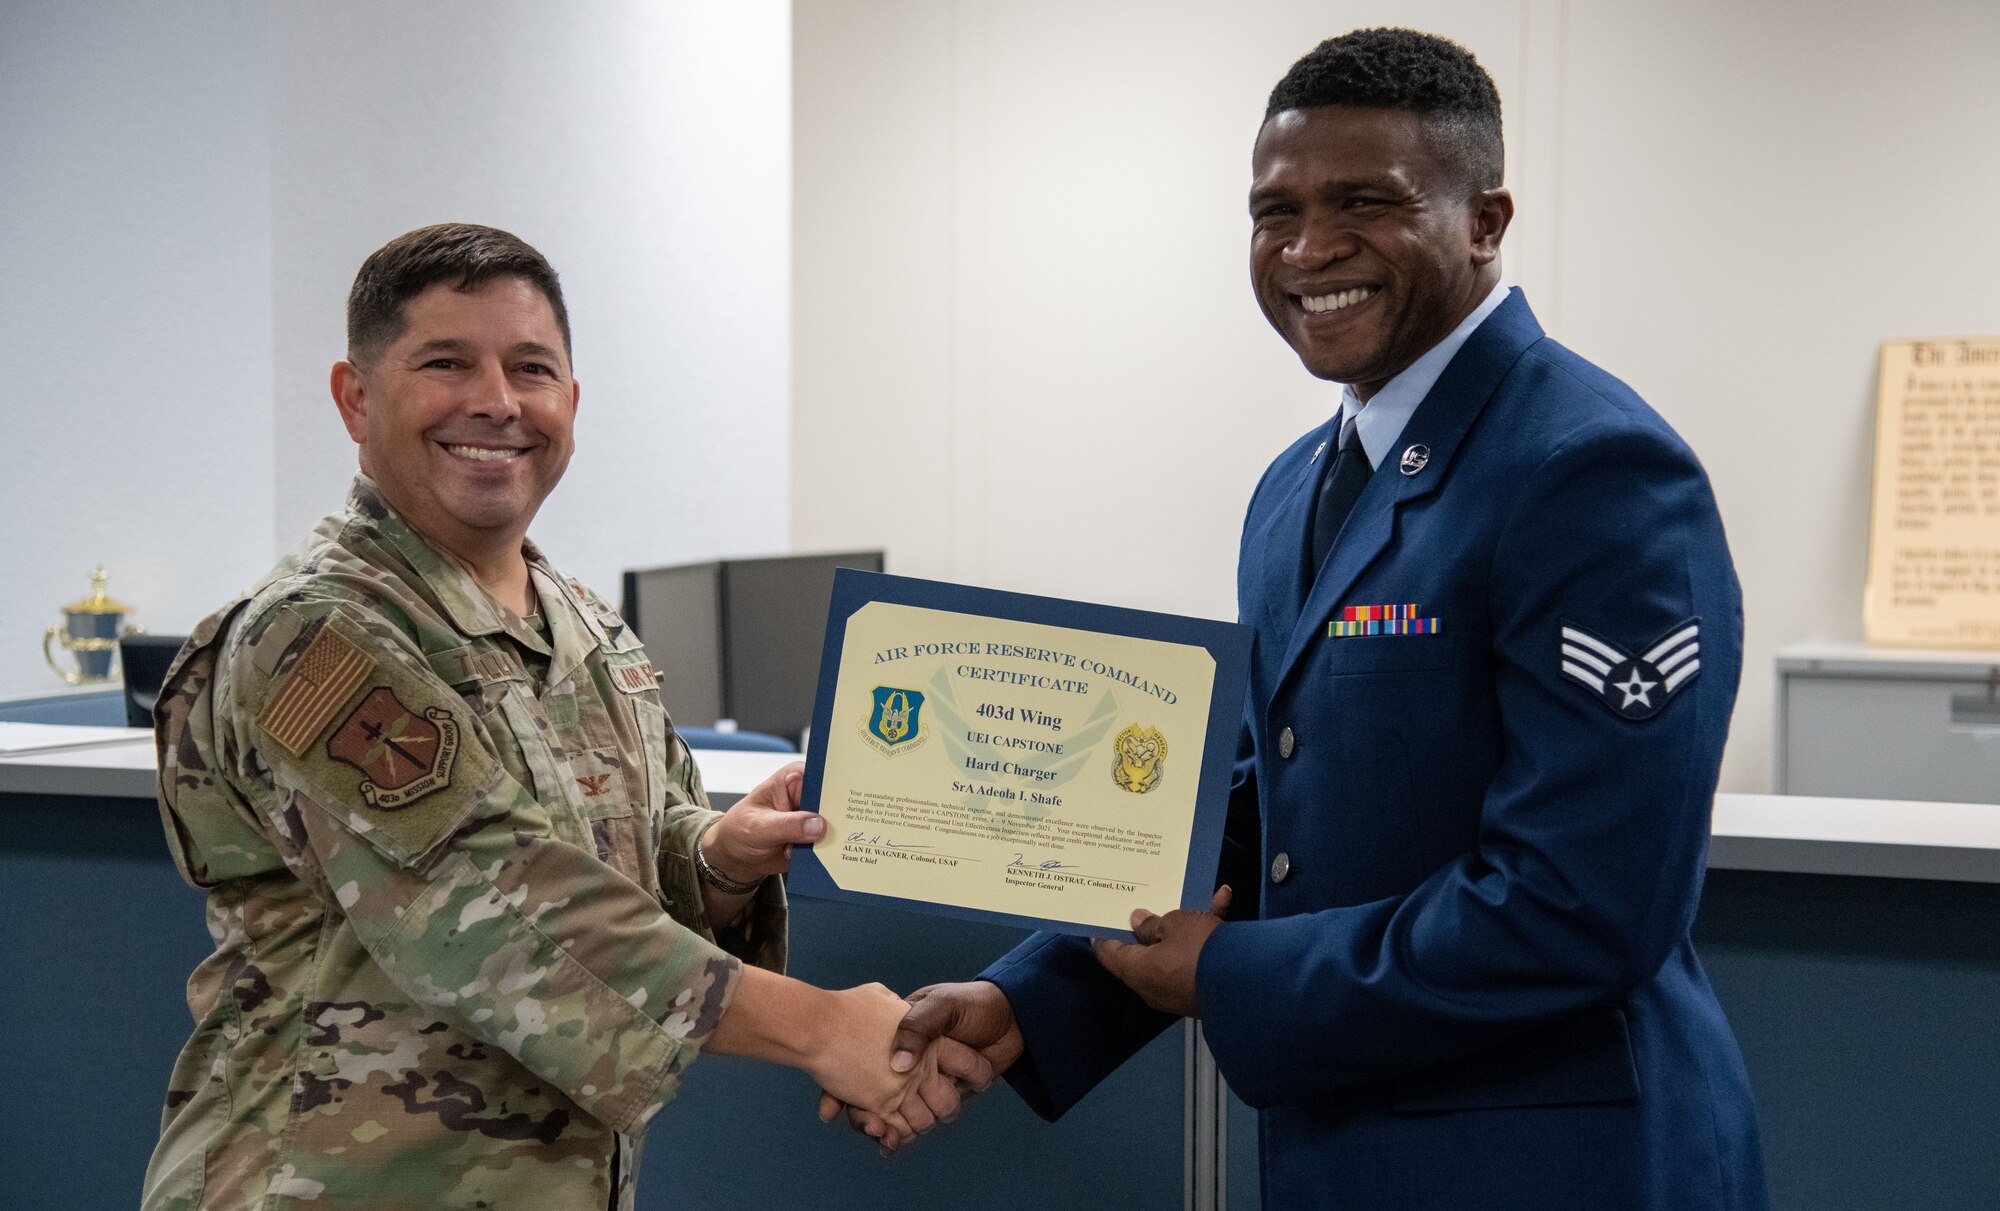 Col. Trujillo left, and Senior Airman Shafe, right, hold a certificate together and shake hands